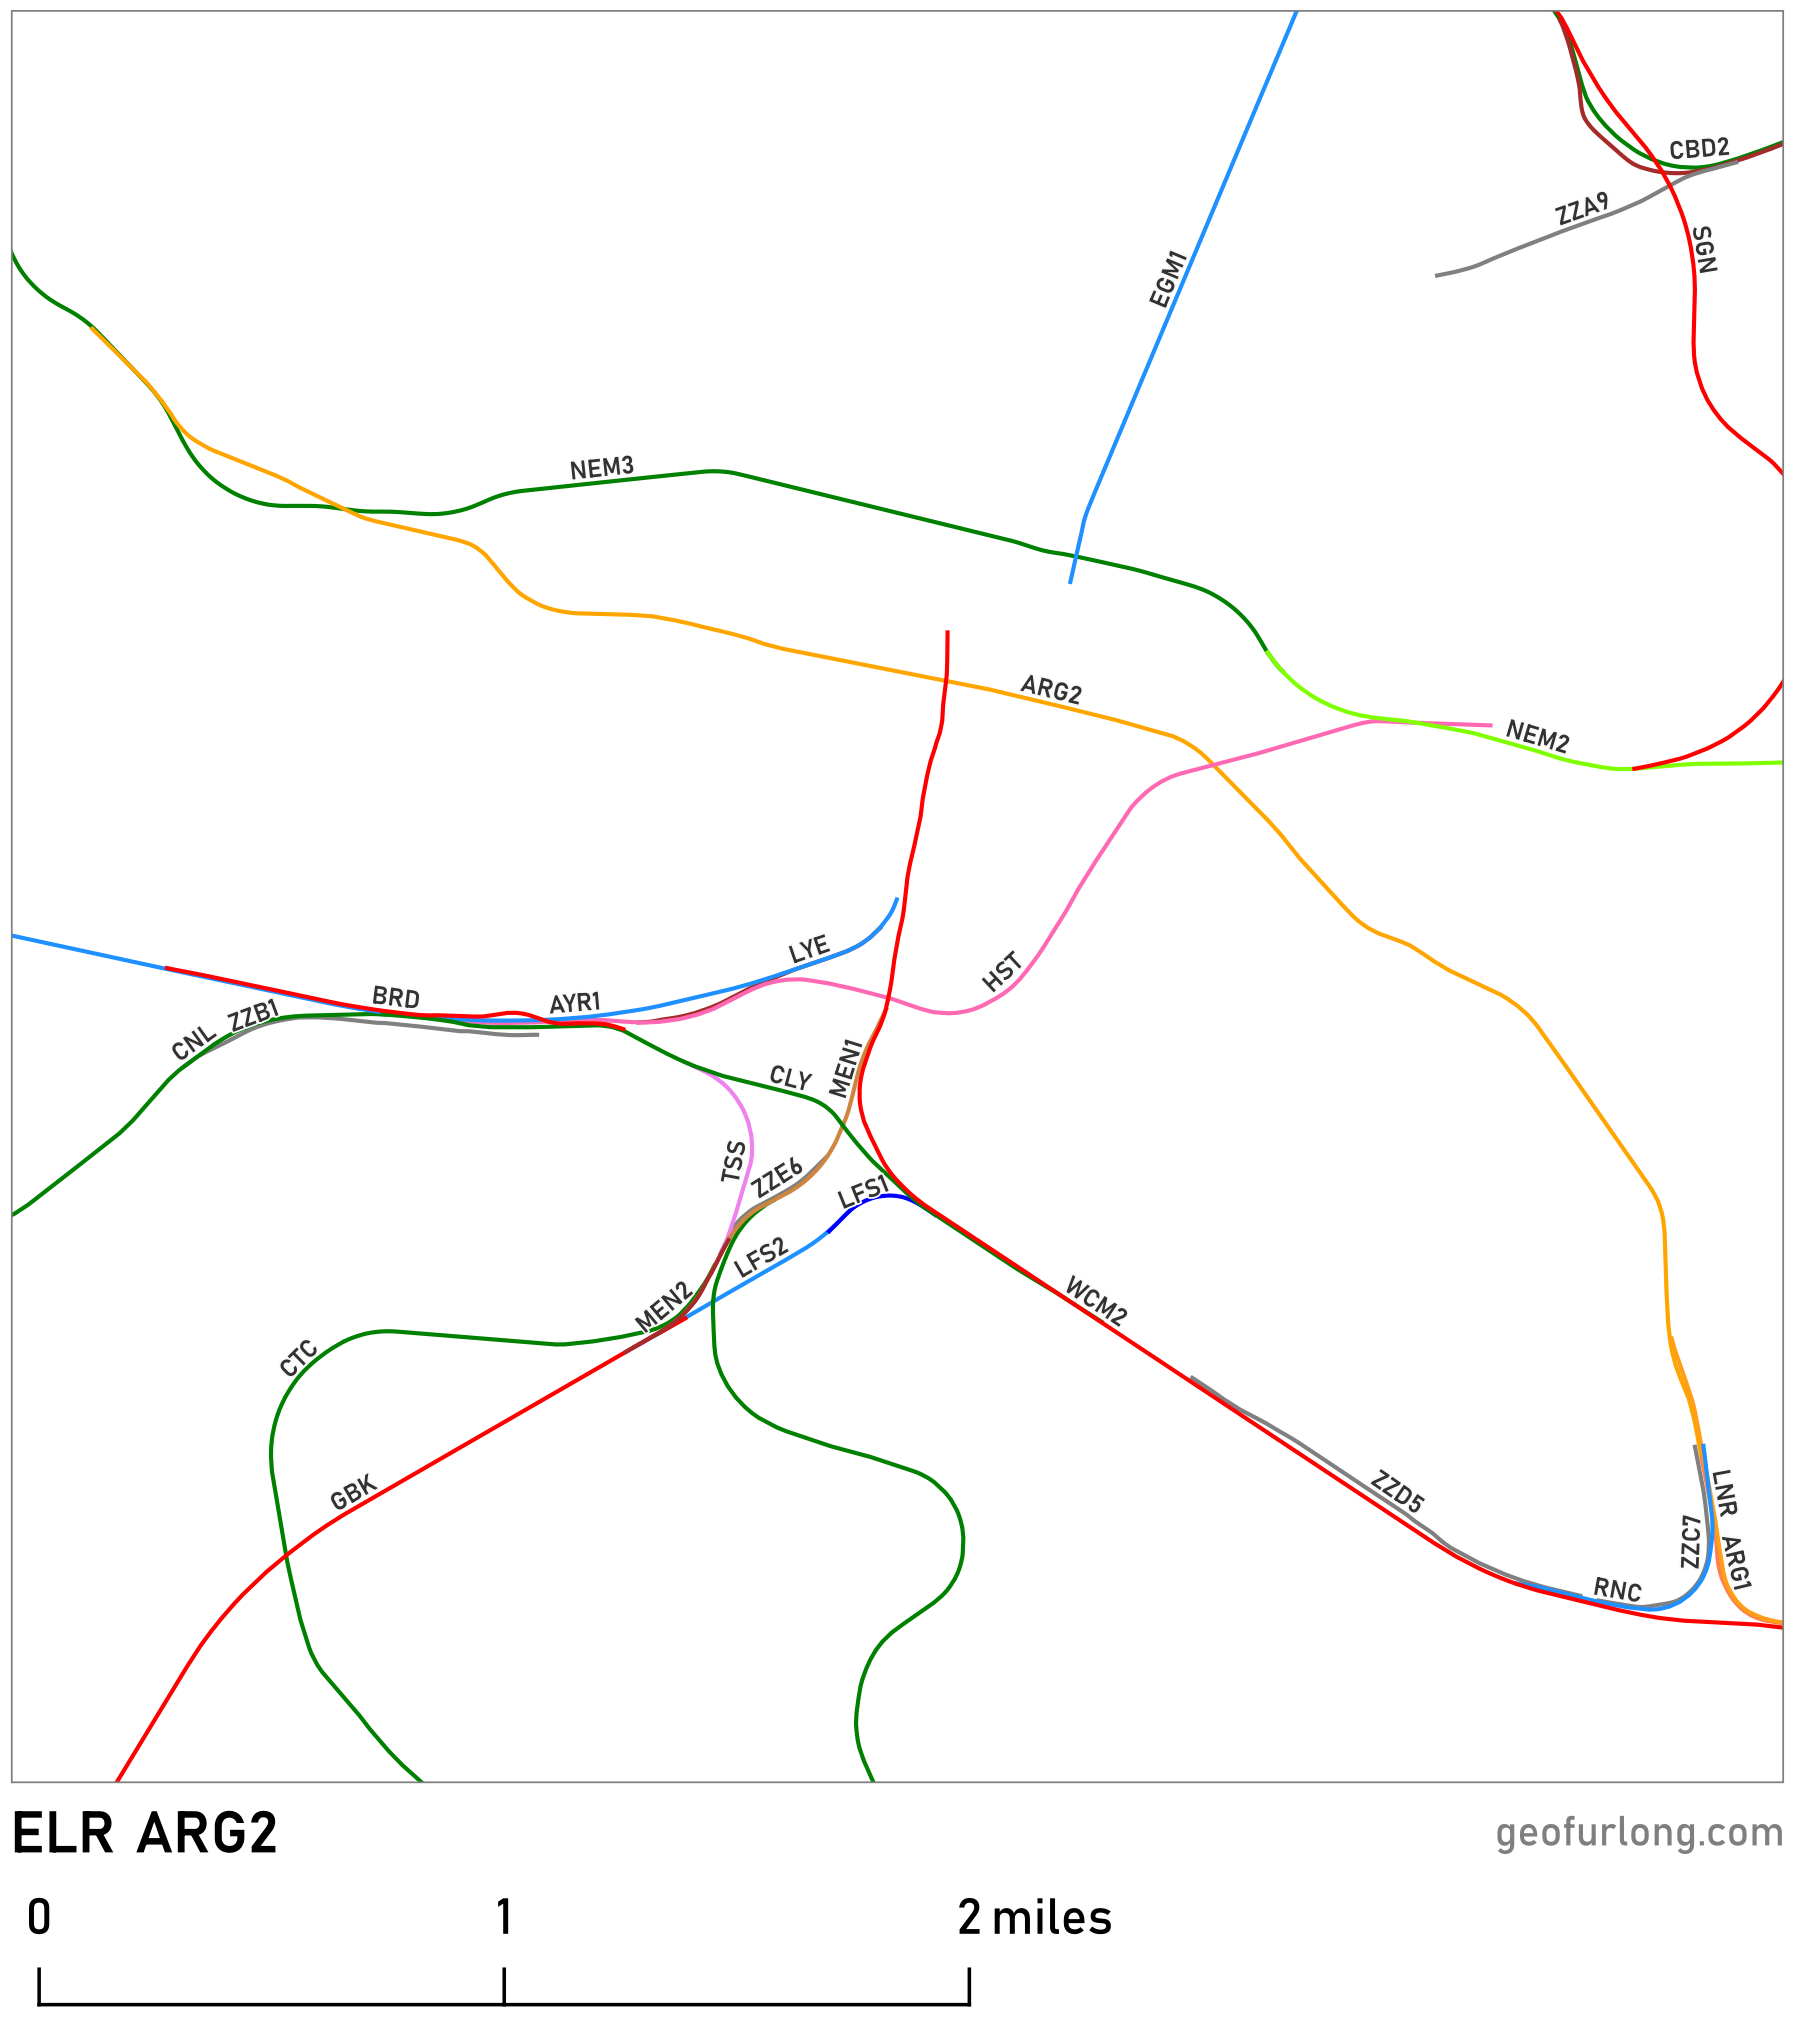 Atlas map for Network Rail ELR ARG2 and surrounding railway lines.